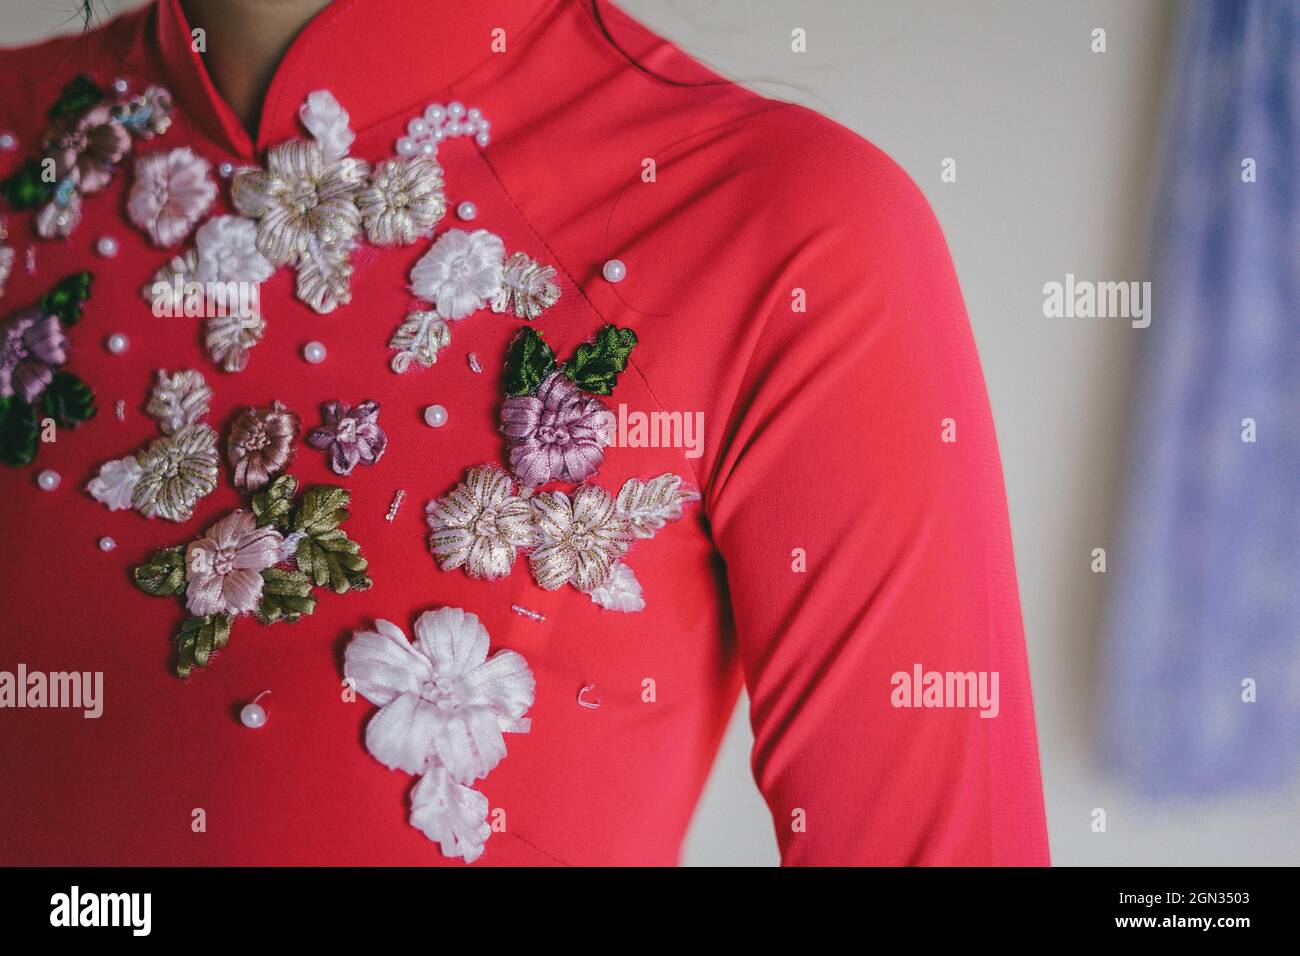 Closeup shot of a woman wearing a red sweatshirt with beautiful embroidered flowers on i Stock Photo